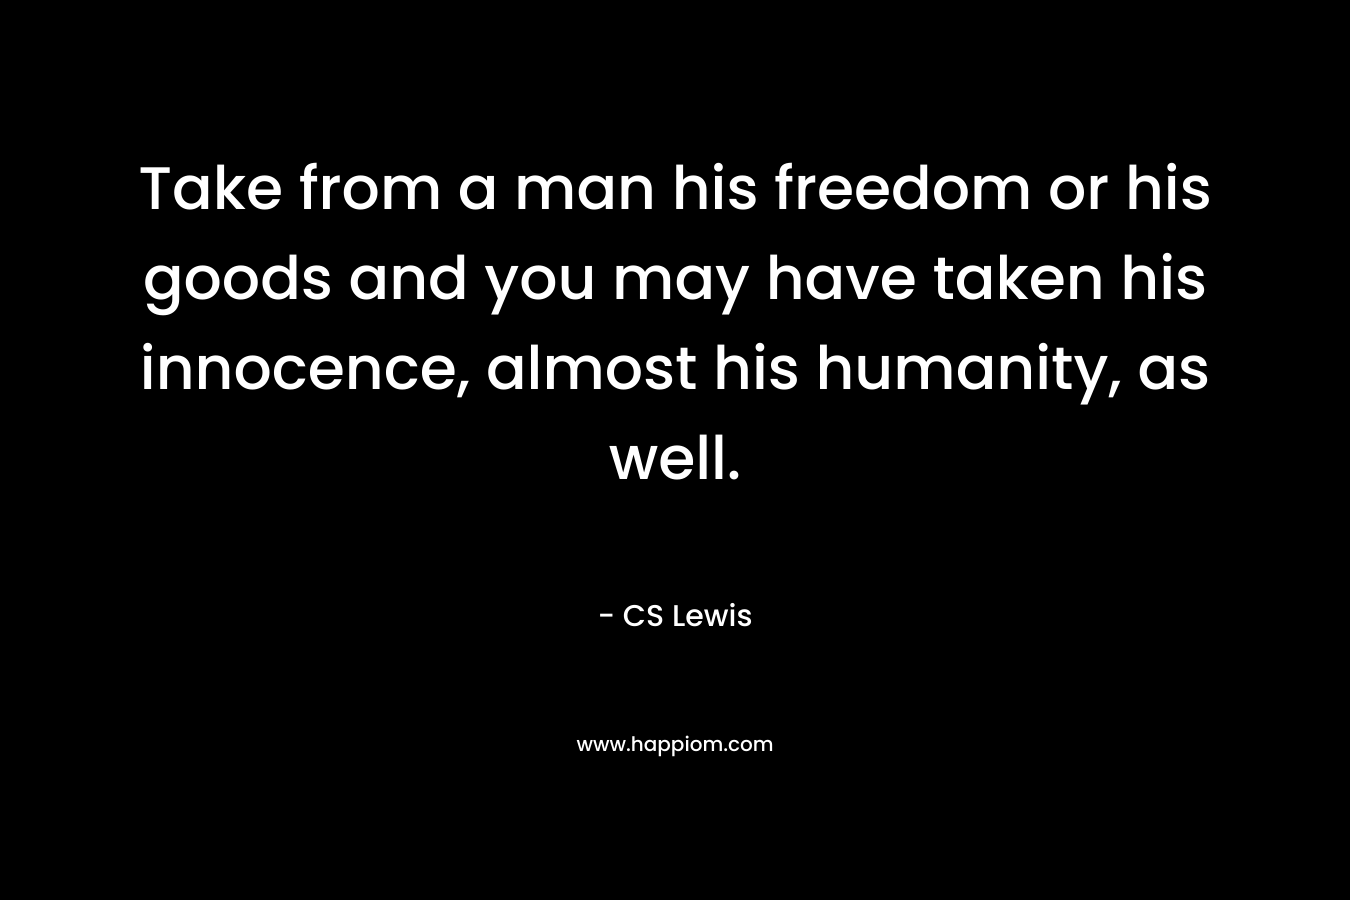 Take from a man his freedom or his goods and you may have taken his innocence, almost his humanity, as well. – CS Lewis